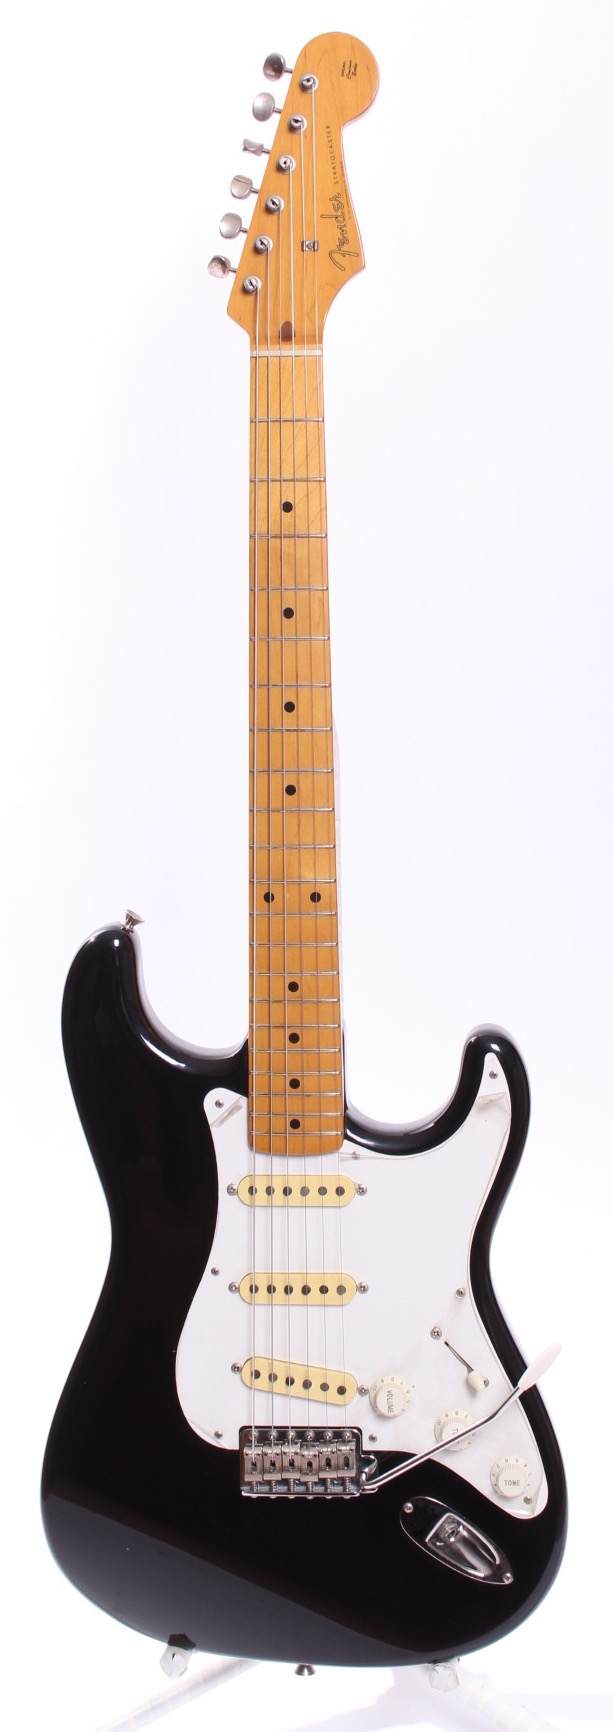 dating a peavey guitar by serial number